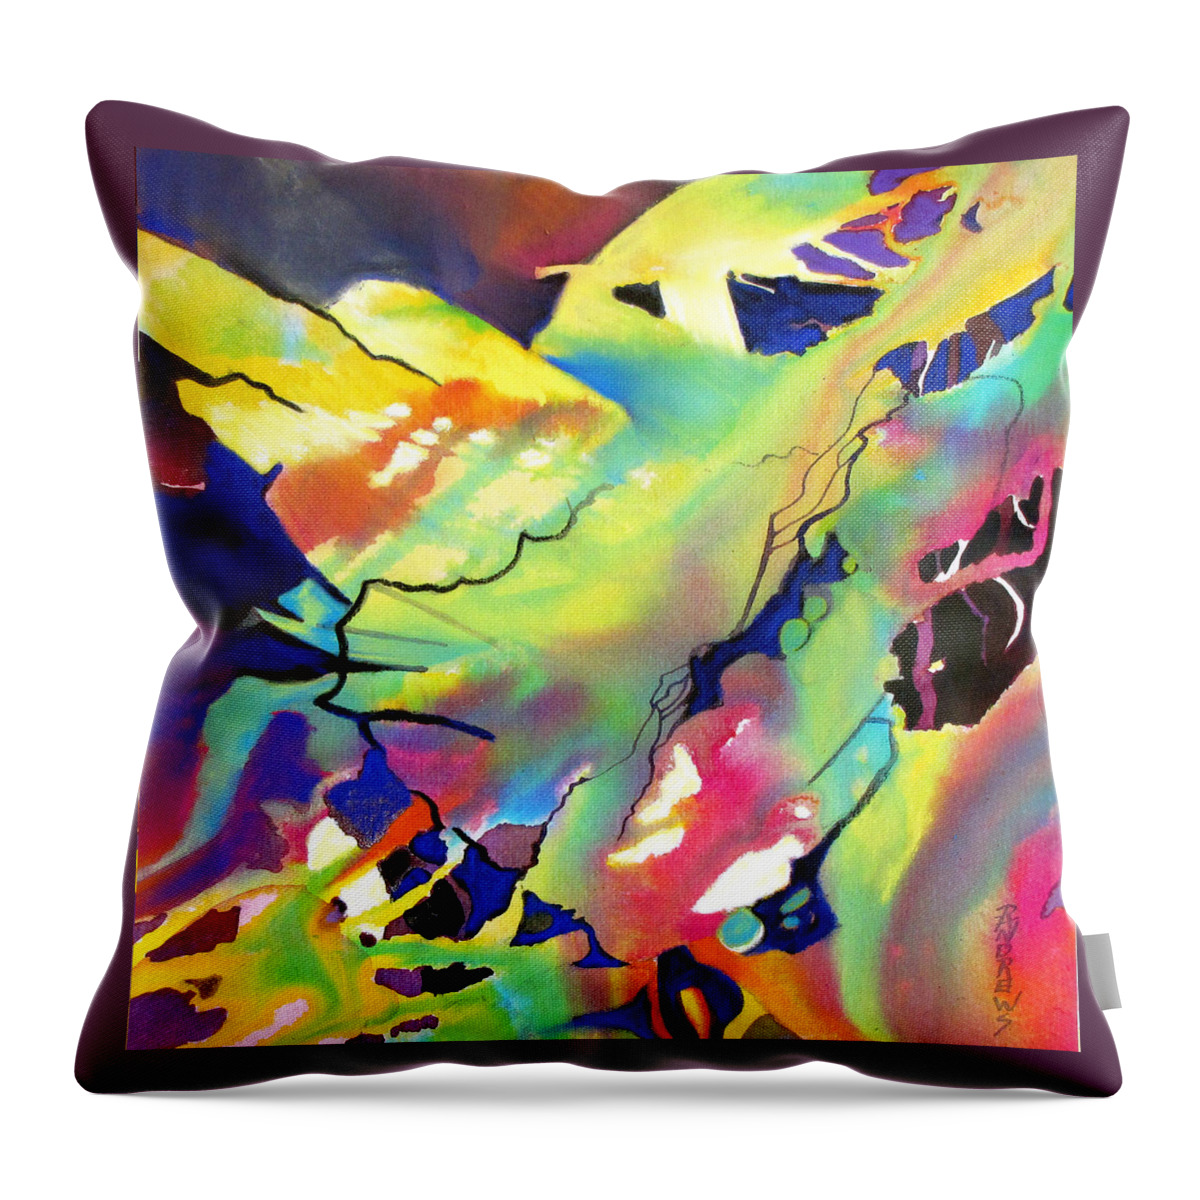 Abstract Throw Pillow featuring the painting On Butterfly Wings by Rae Andrews